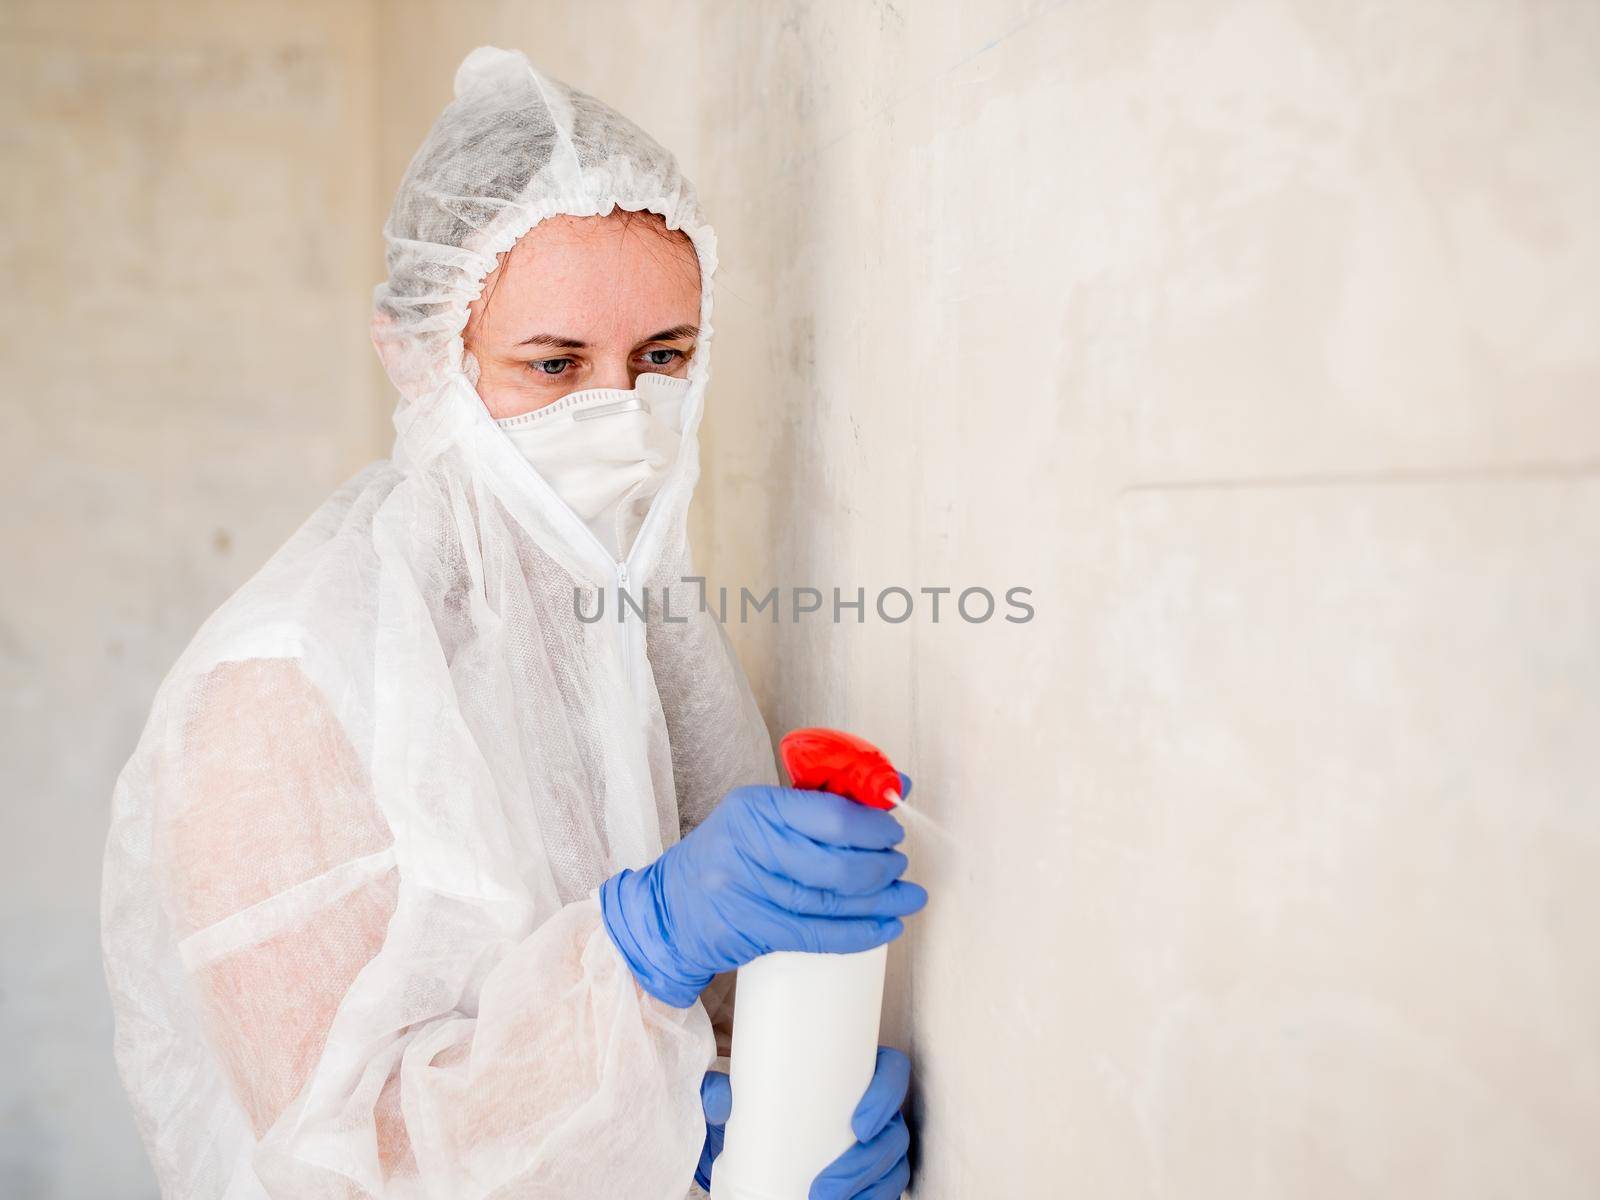 A woman in a protective suit sprays the walls of an apartment with a chemical agent to remove mold.